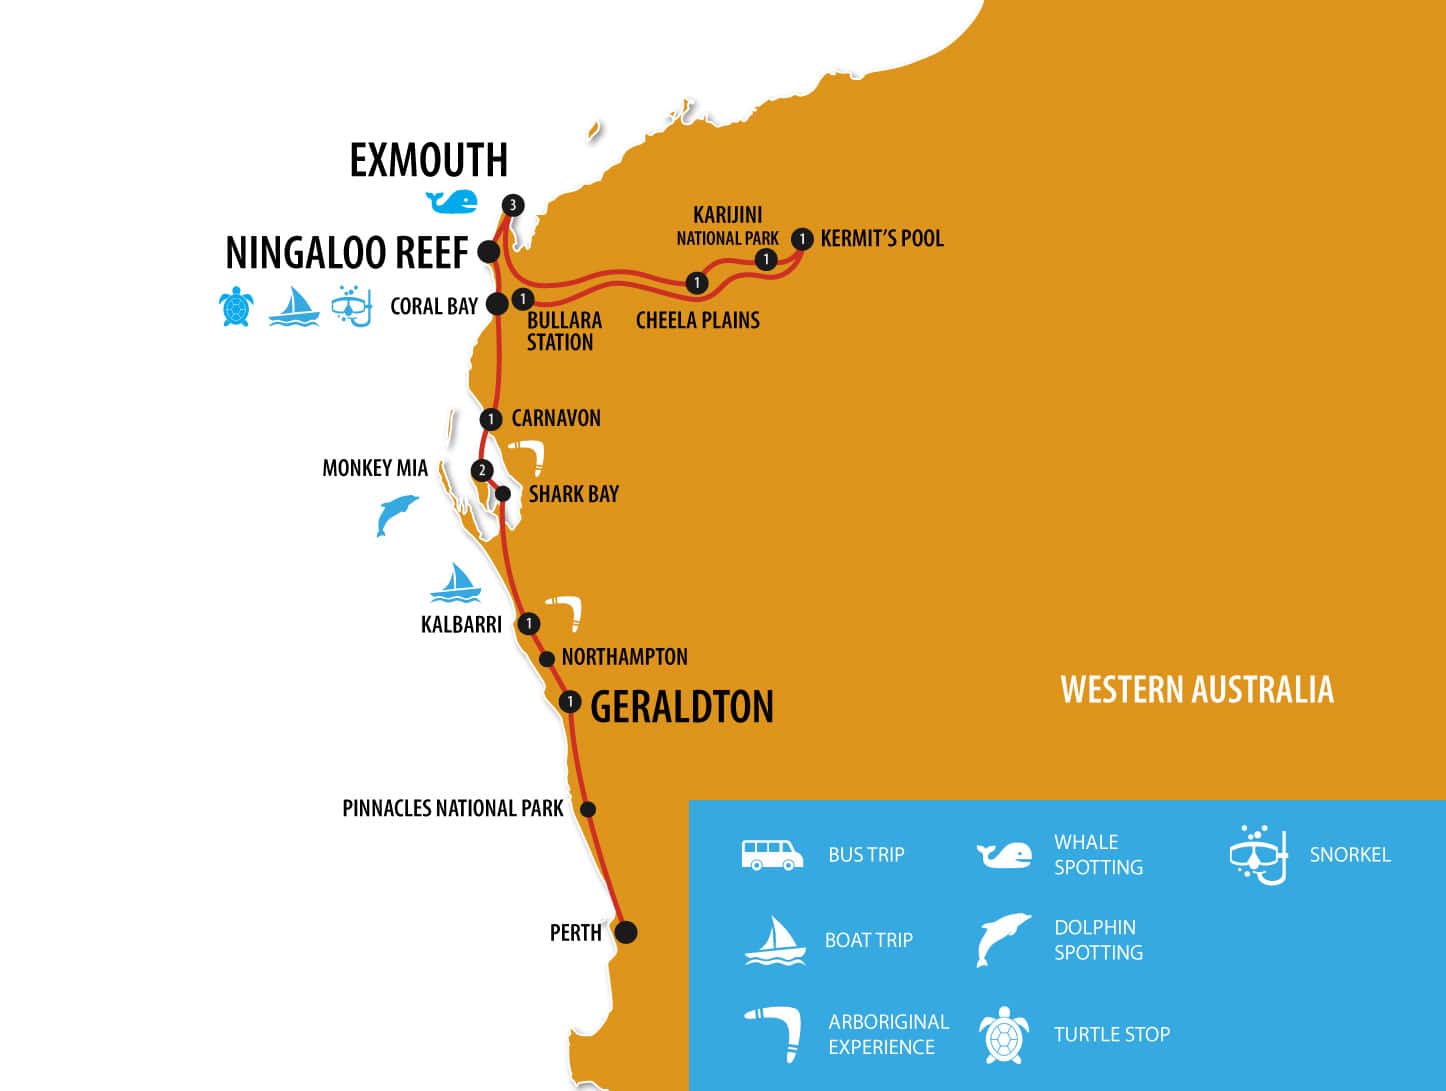 West Coast Encompassed - Perth to Karijini National Park - 13 Day Tour itinerary